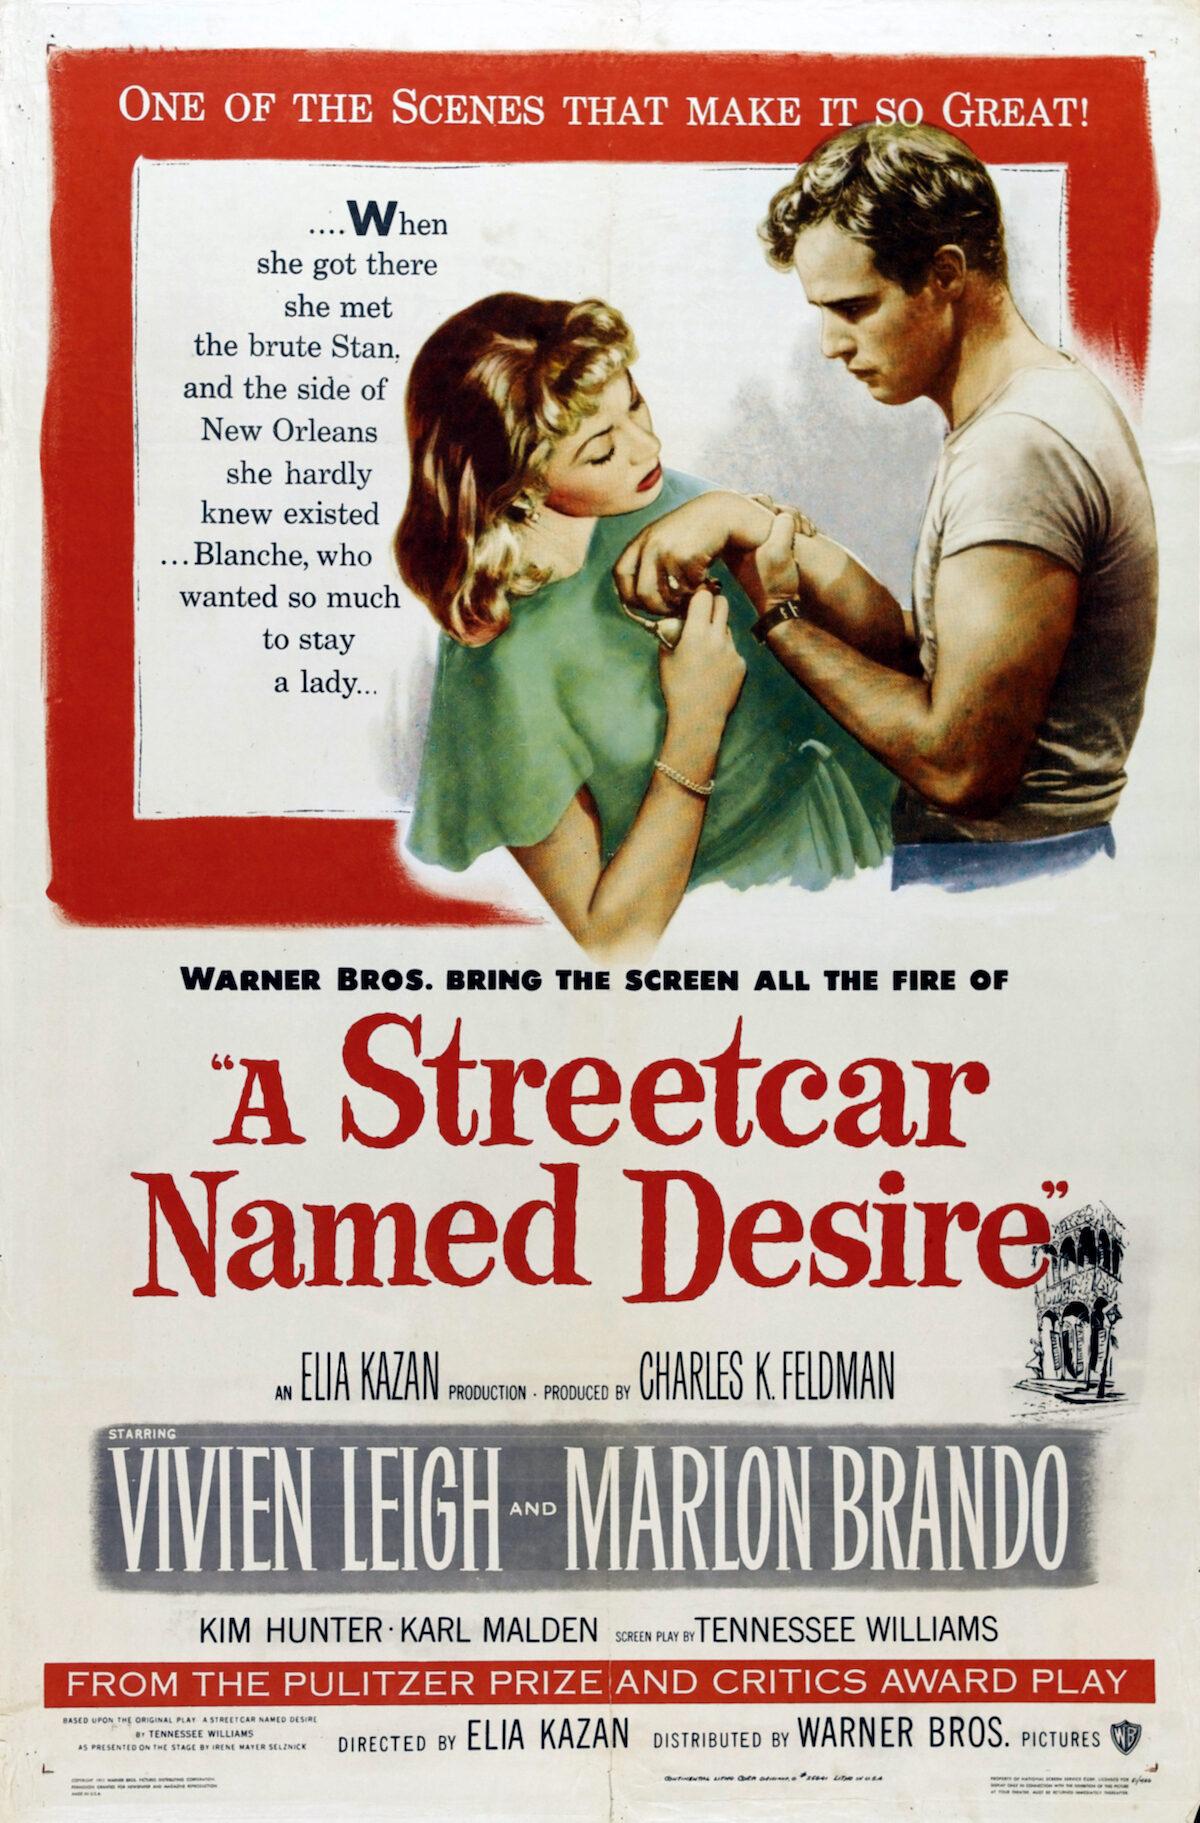 The poster from the film "A Streetcar Named Desire" from 1951. (Public Domain)